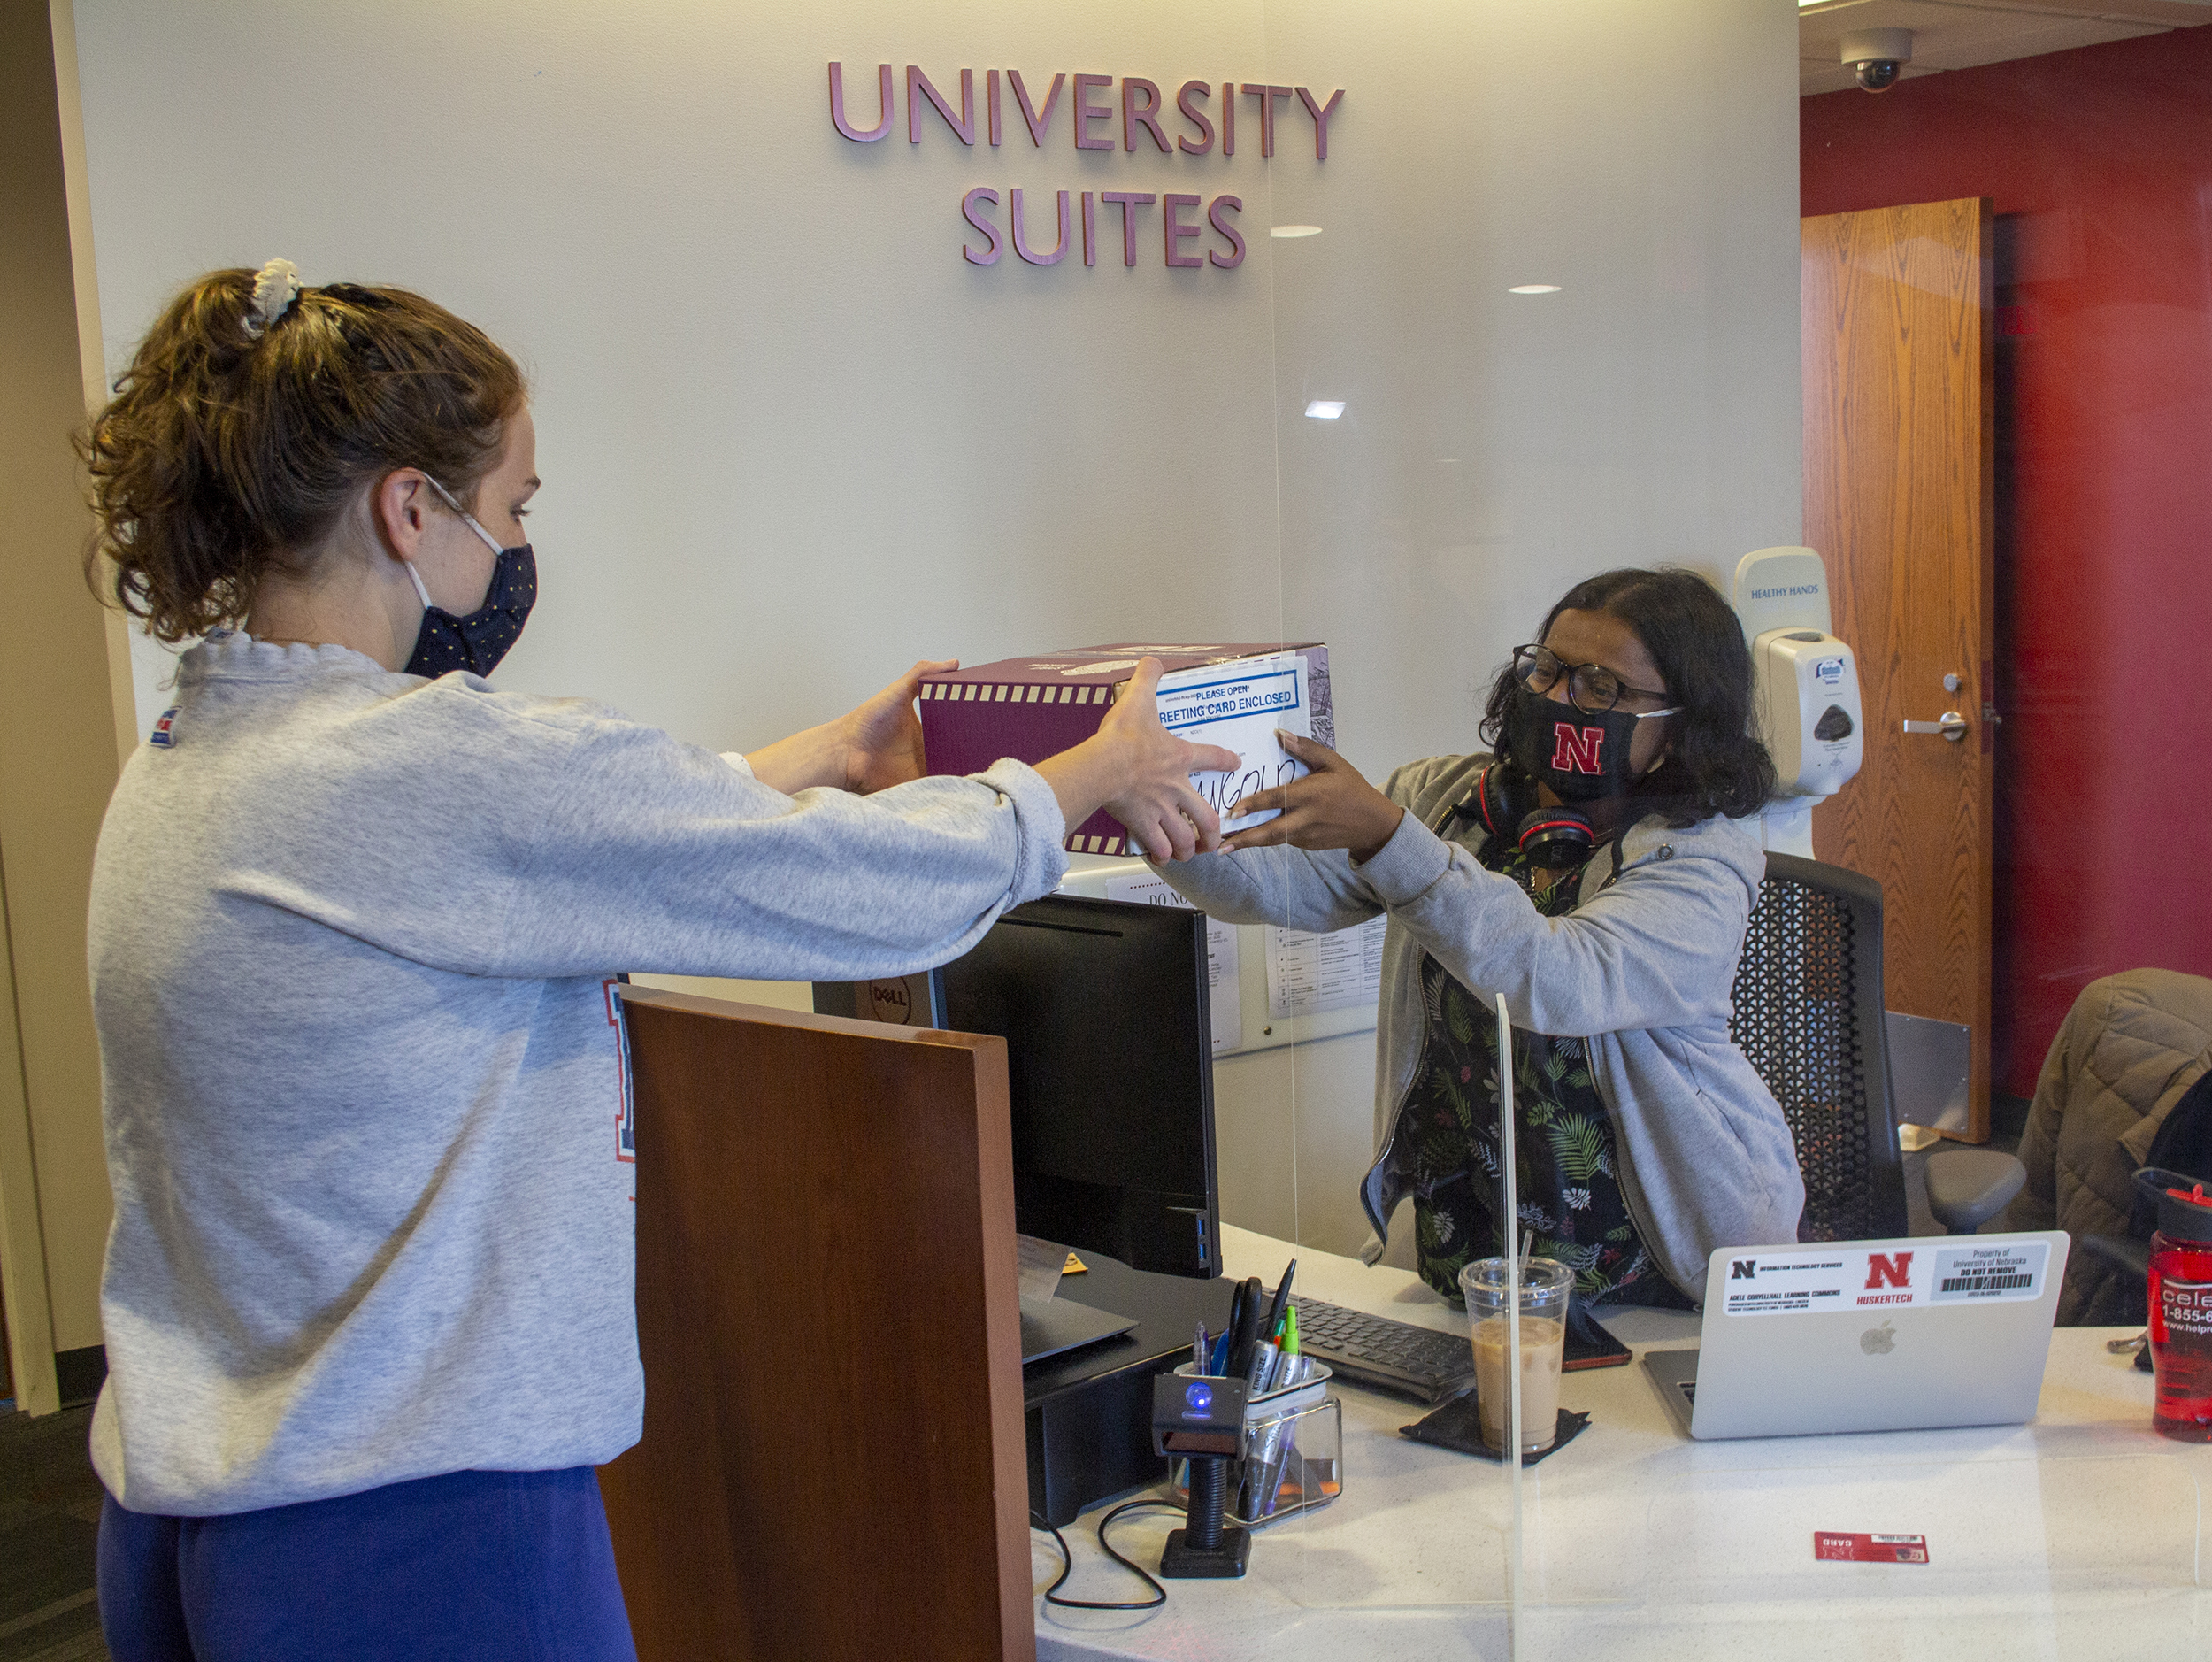 A student desk attendant assists a Husker at the Welcome Desk inside University Suites. [Mike Jackson | Student Affairs]